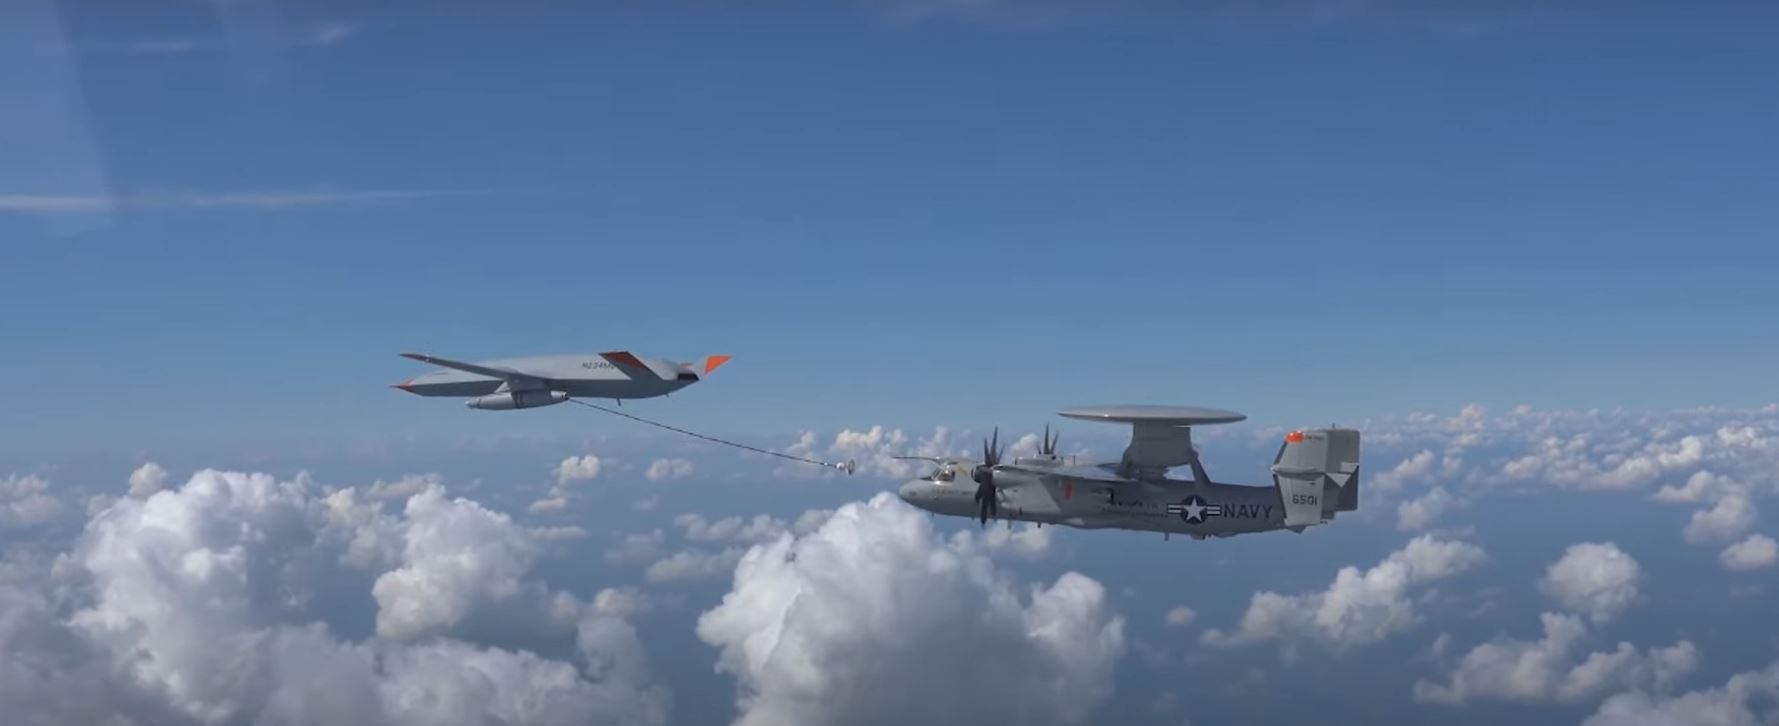 Boeing MQ-25 Drone Completes It's Second Successful Air-To-Air Refueling With An E-2D 7